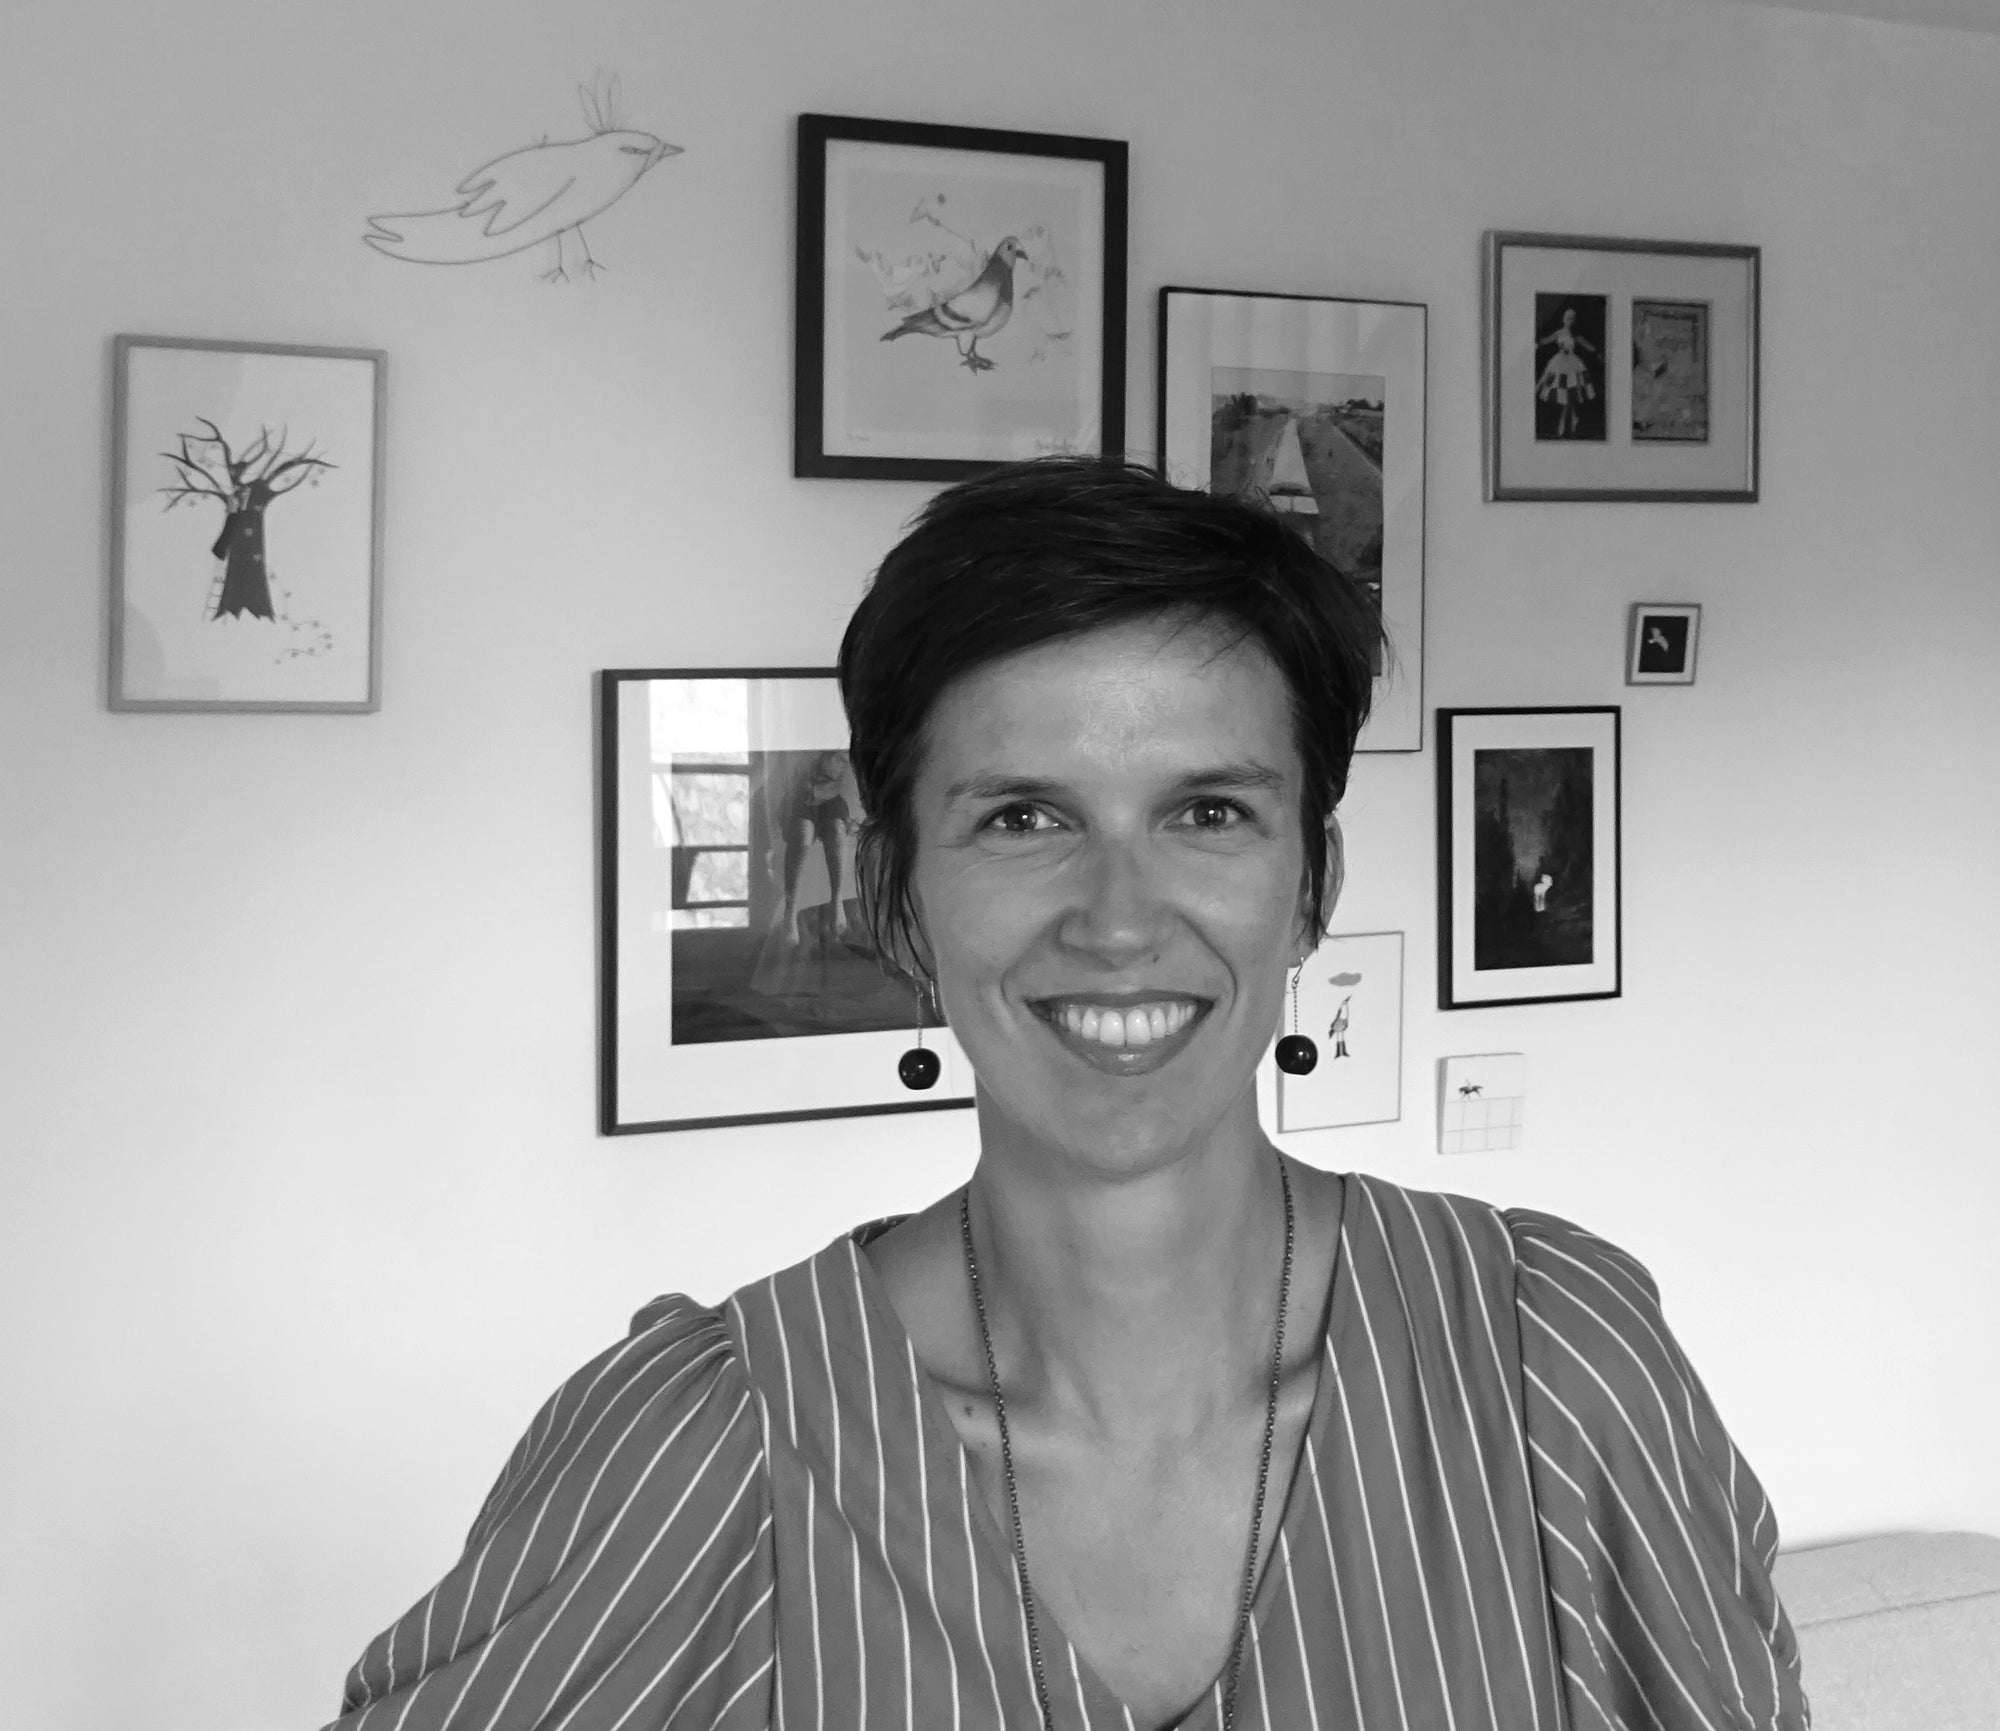 Interview with Virginie Cognet: on drawing, plants and inspiration.